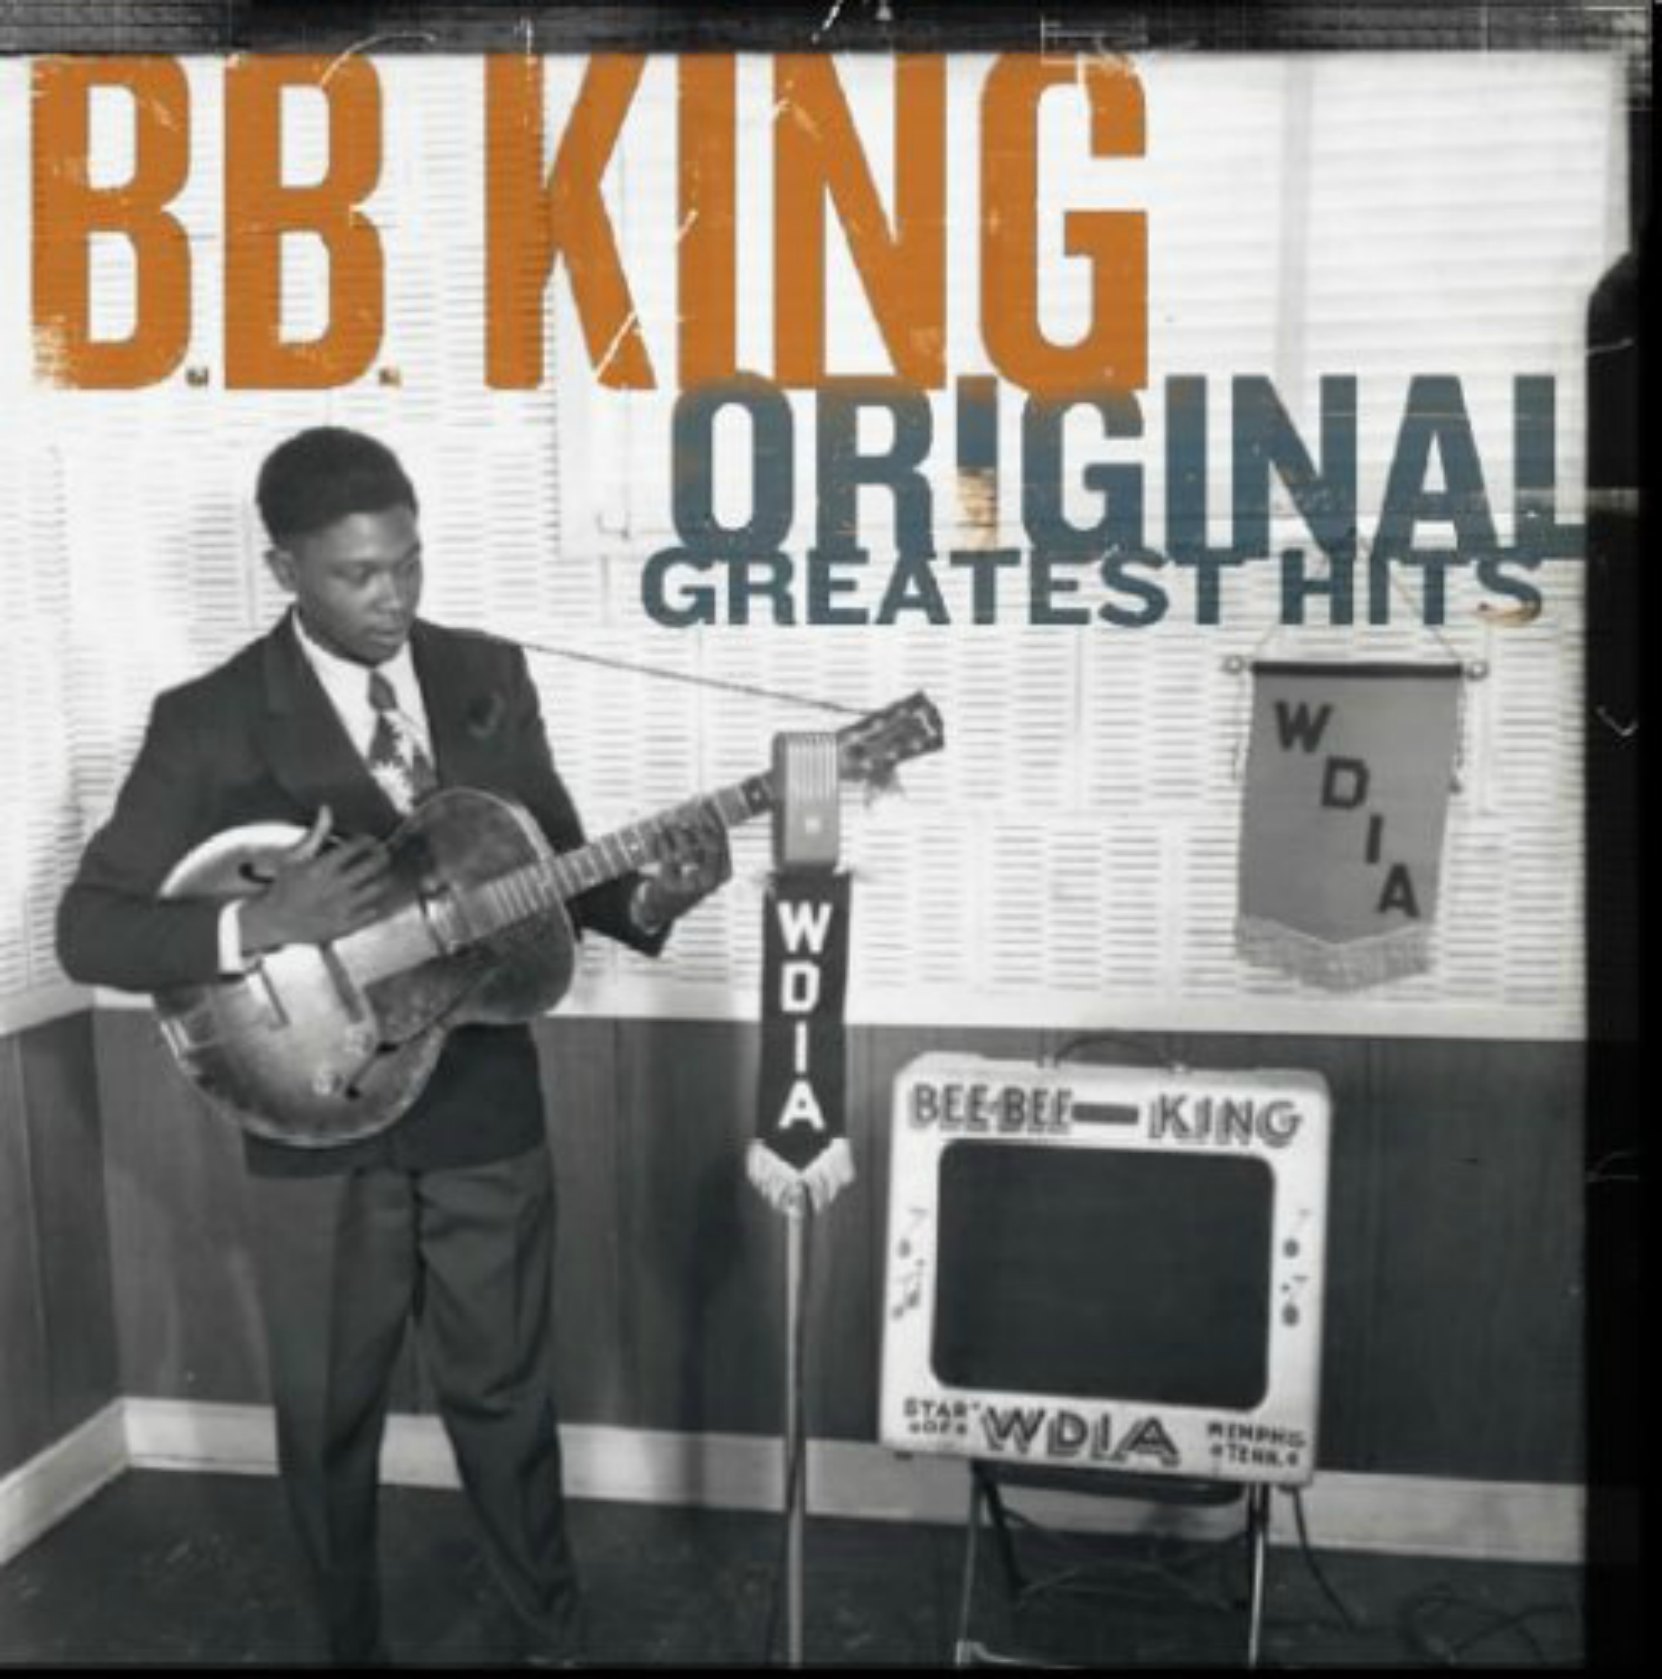 CD cover, Original Greatest Hits by B.B. King